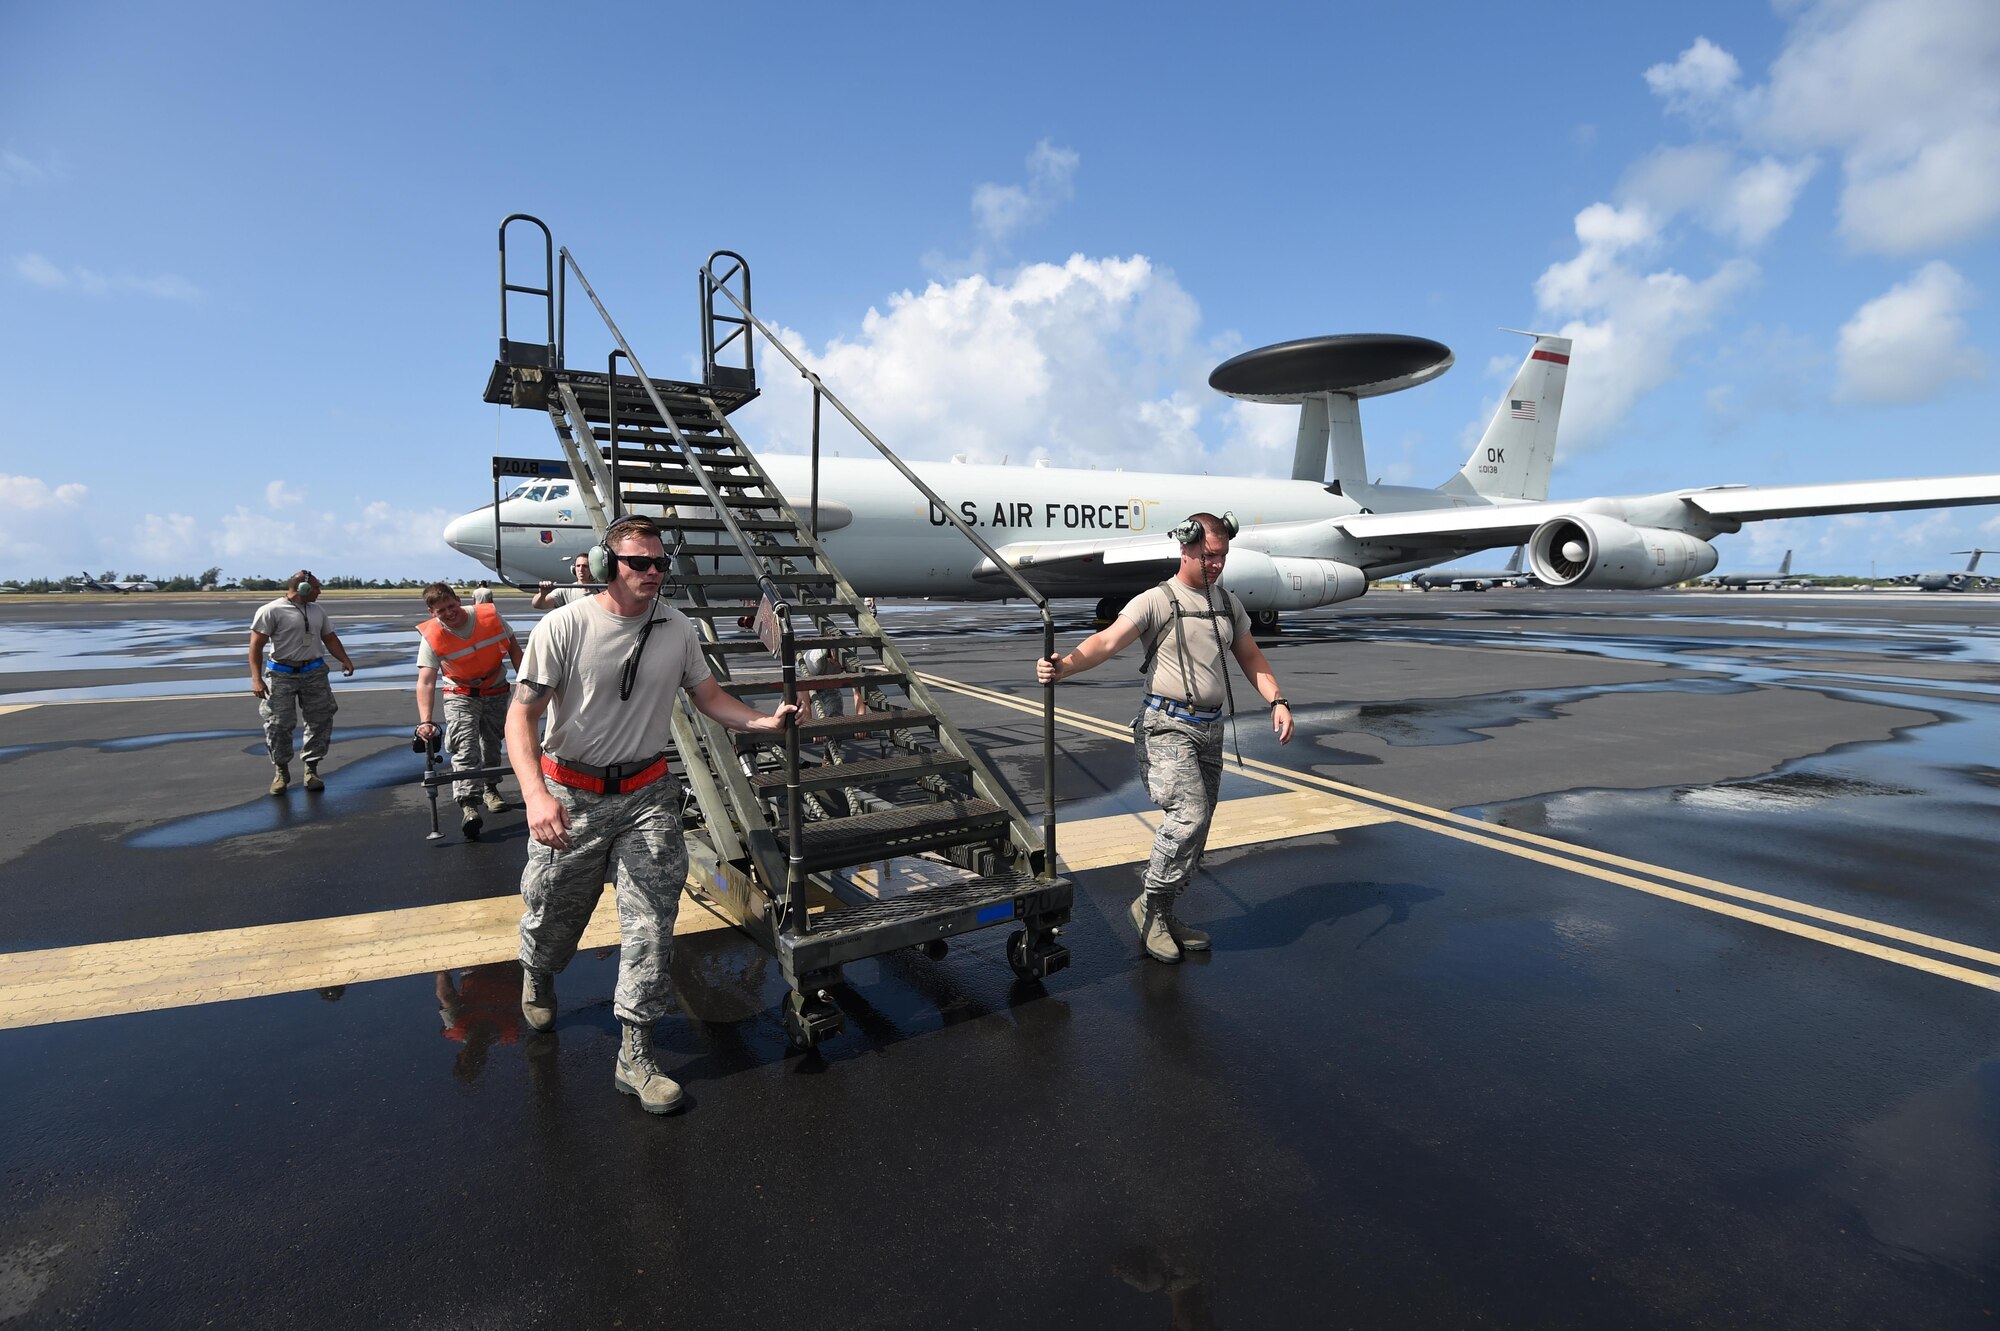 Maintenance Reservists from the 513th Aircraft Maintenance Squadron roll stairs away from an E-3 Sentry on July 19, 2016, at Joint Base Pearl Harbor-Hickam, Hawaii. More than 125 Airmen from the 513th Air Control Group and 552nd Air Control Wing are deployed to Hawaii in support of the Rim of the Pacific 2016 exercise. Twenty-six nations, more than 40 ships and submarines, more than 200 aircraft and 25,000 personnel are participating in RIMPAC from June 30 to Aug. 4, in and around the Hawaiian Islands and Southern California. The world's largest international maritime exercise, RIMPAC provides a unique training opportunity that helps participants foster and sustain the cooperative relationships that are critical to ensuring the safety of sea lanes and security on the world's oceans. RIMPAC 2016 is the 25th exercise in the series that began in 1971. (U.S. Air Force photo by 2nd Lt. Caleb Wanzer)